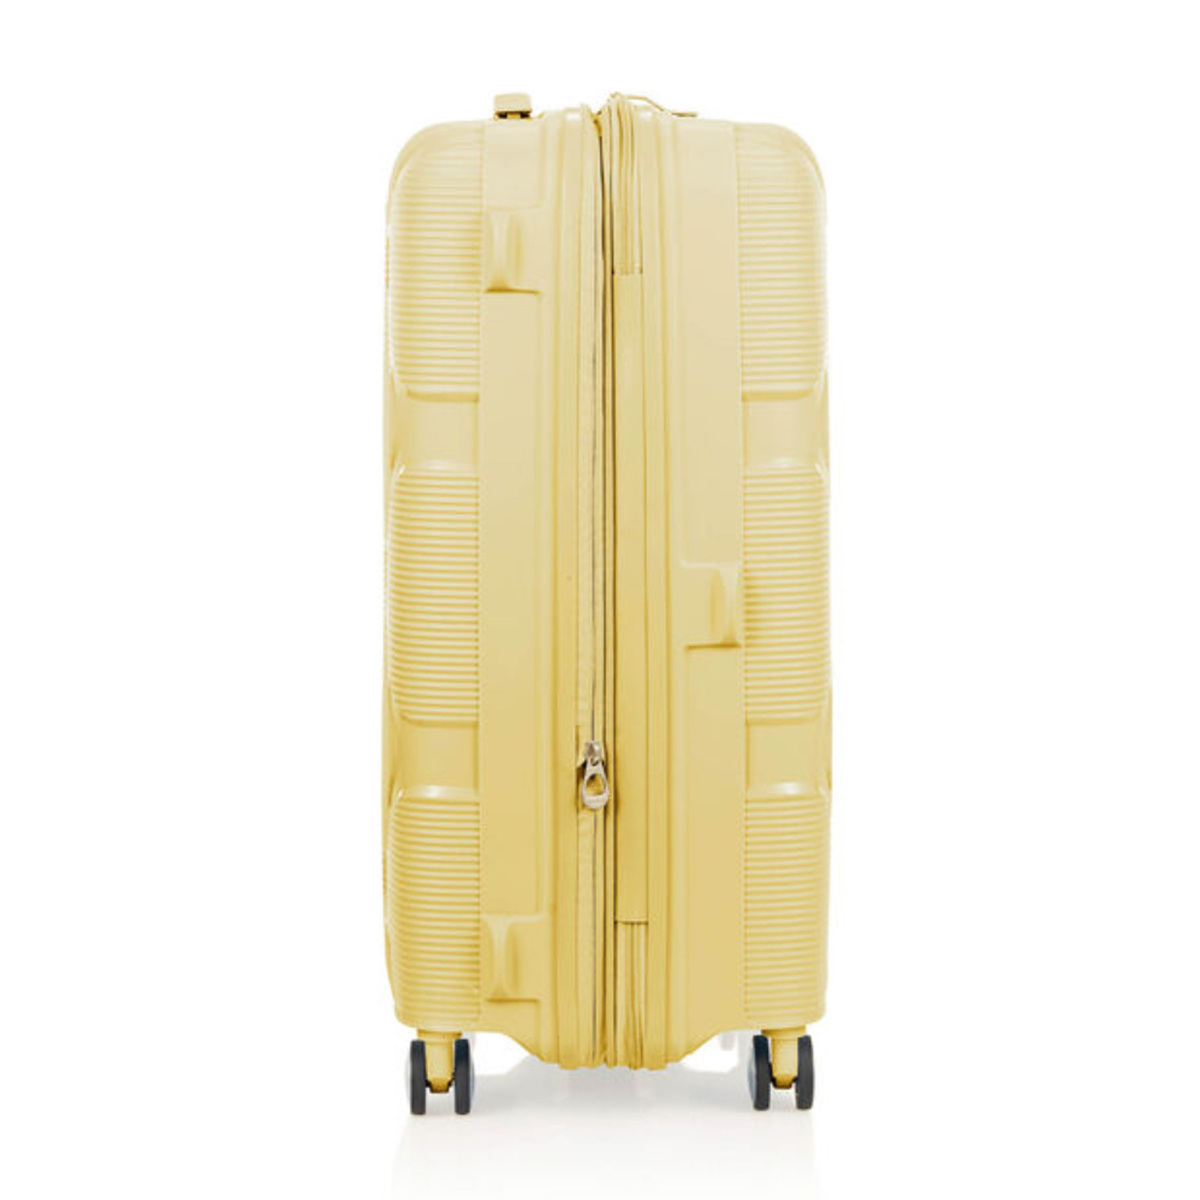 American Tourister Instagon Spinner Hard Trolley with Expander and TSA Combination Lock, 69 cm, Pastel Yellow